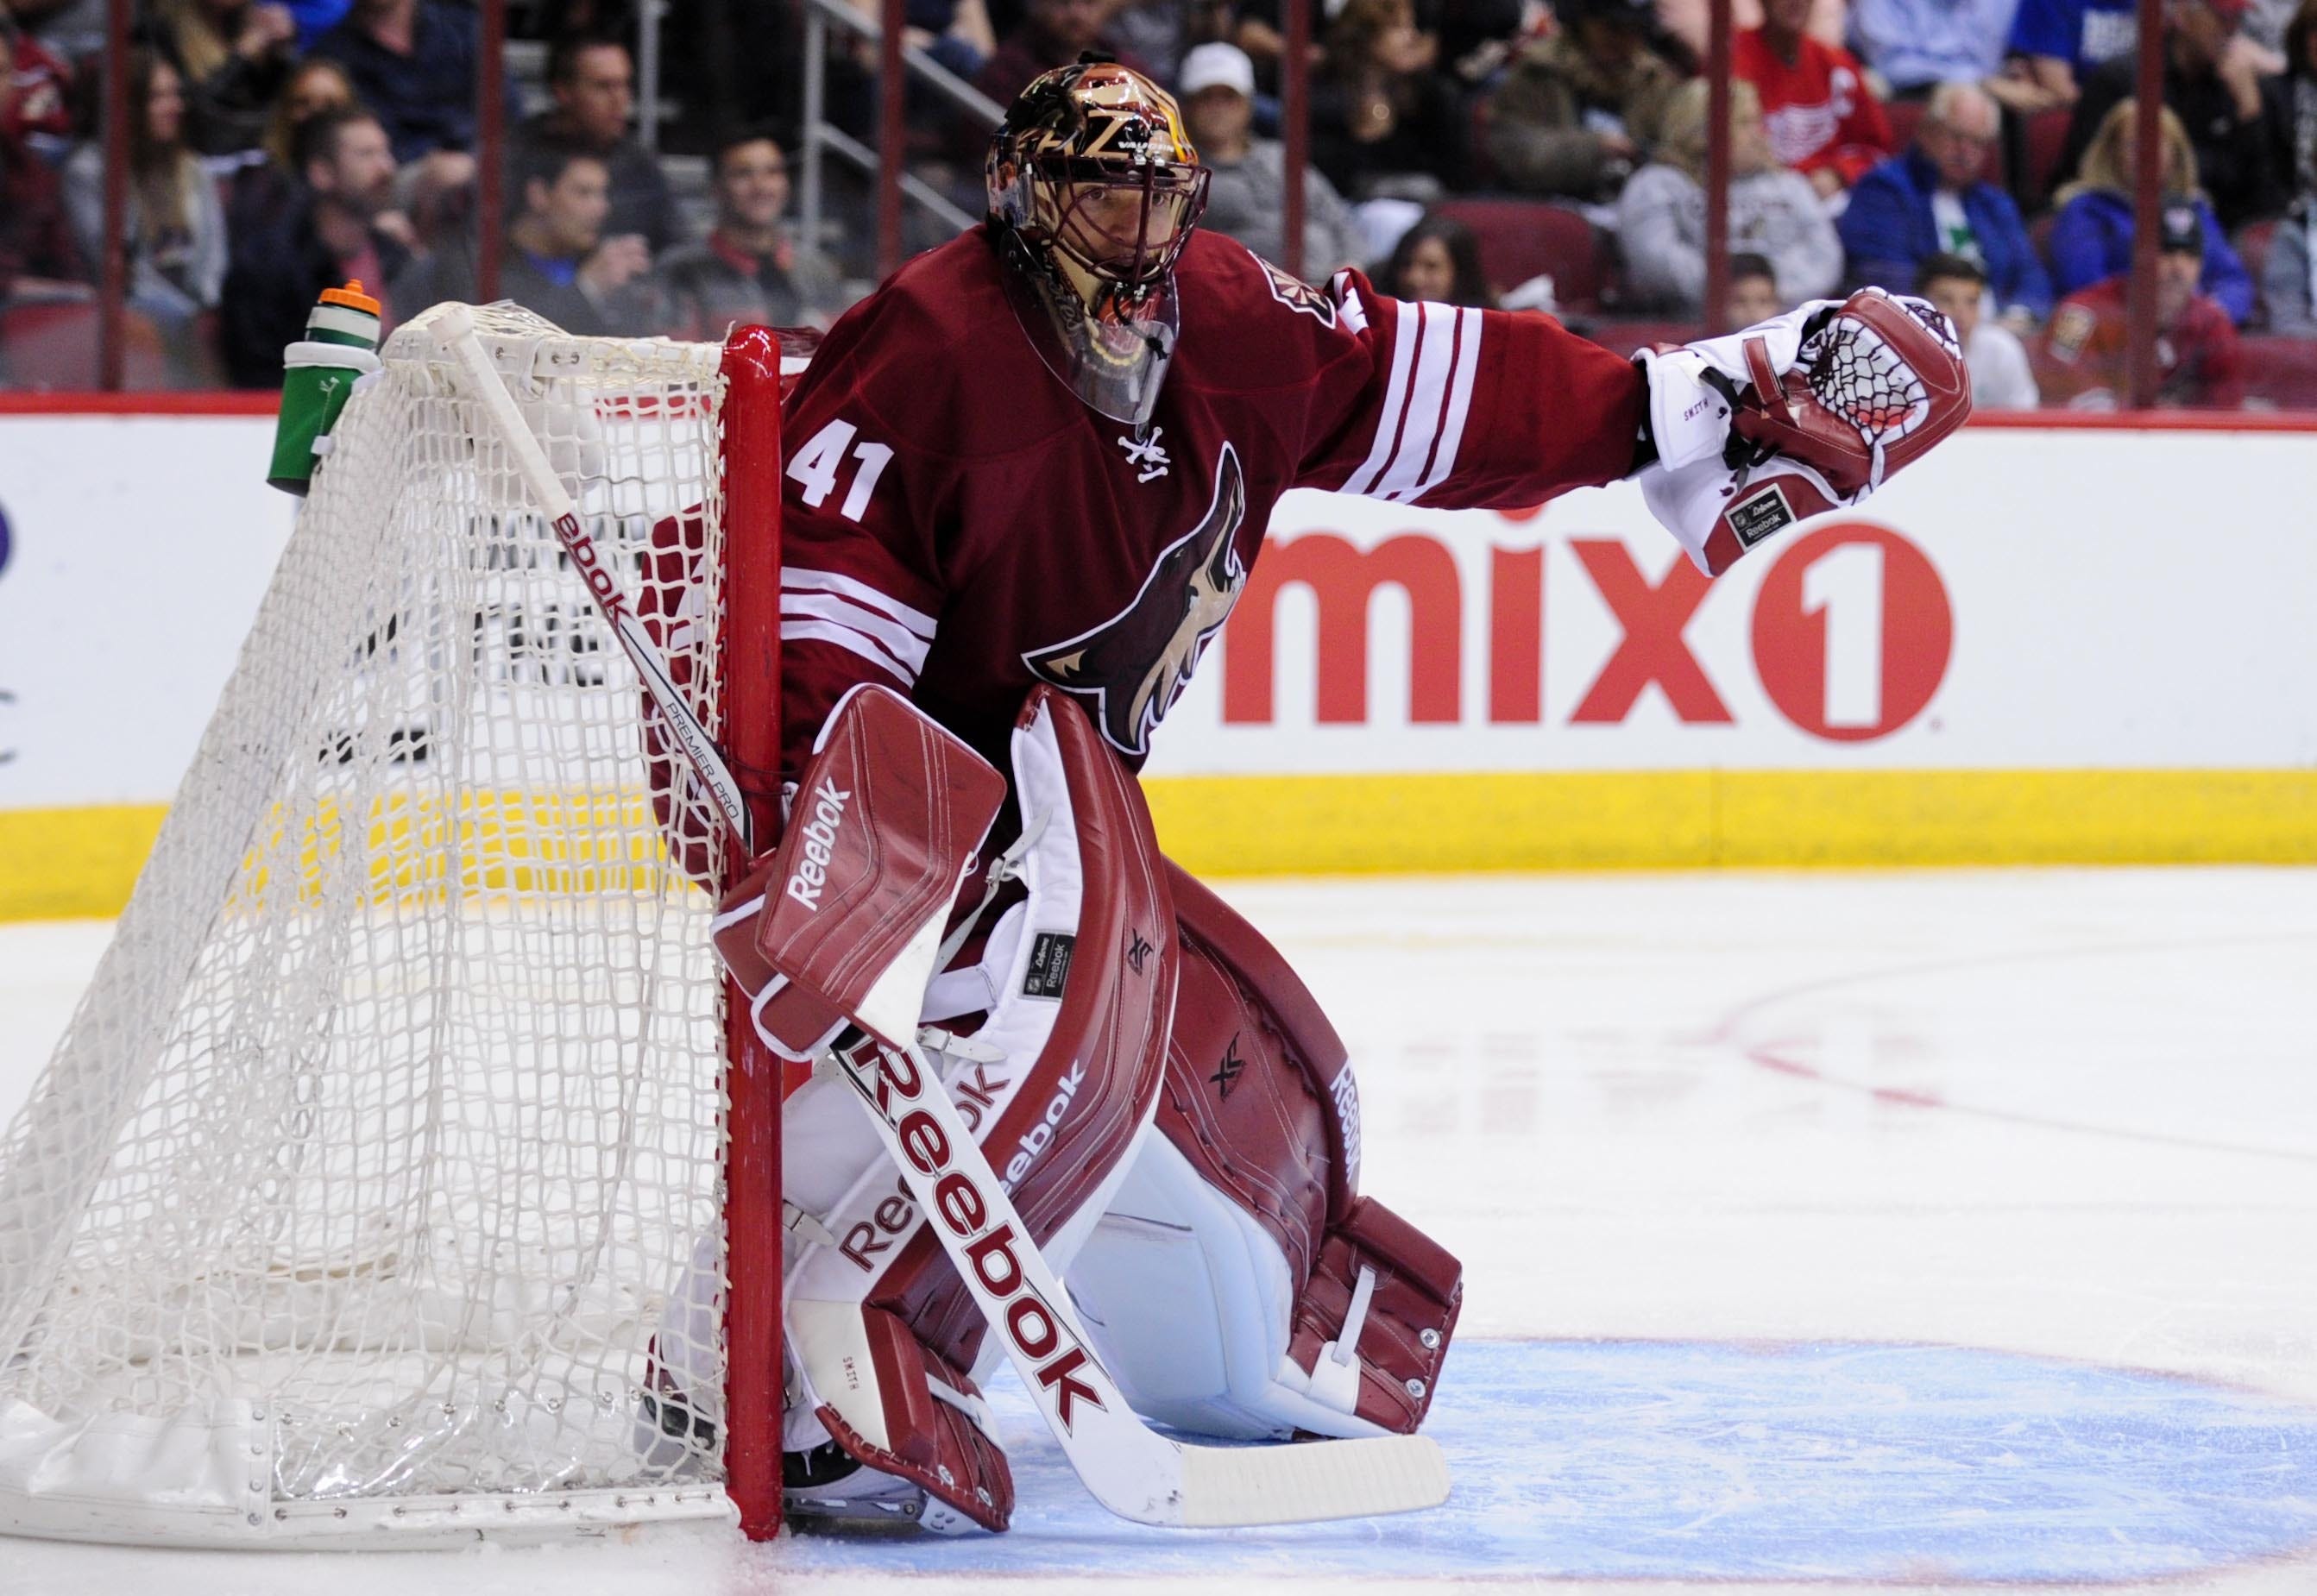 mike smith coyotes jersey